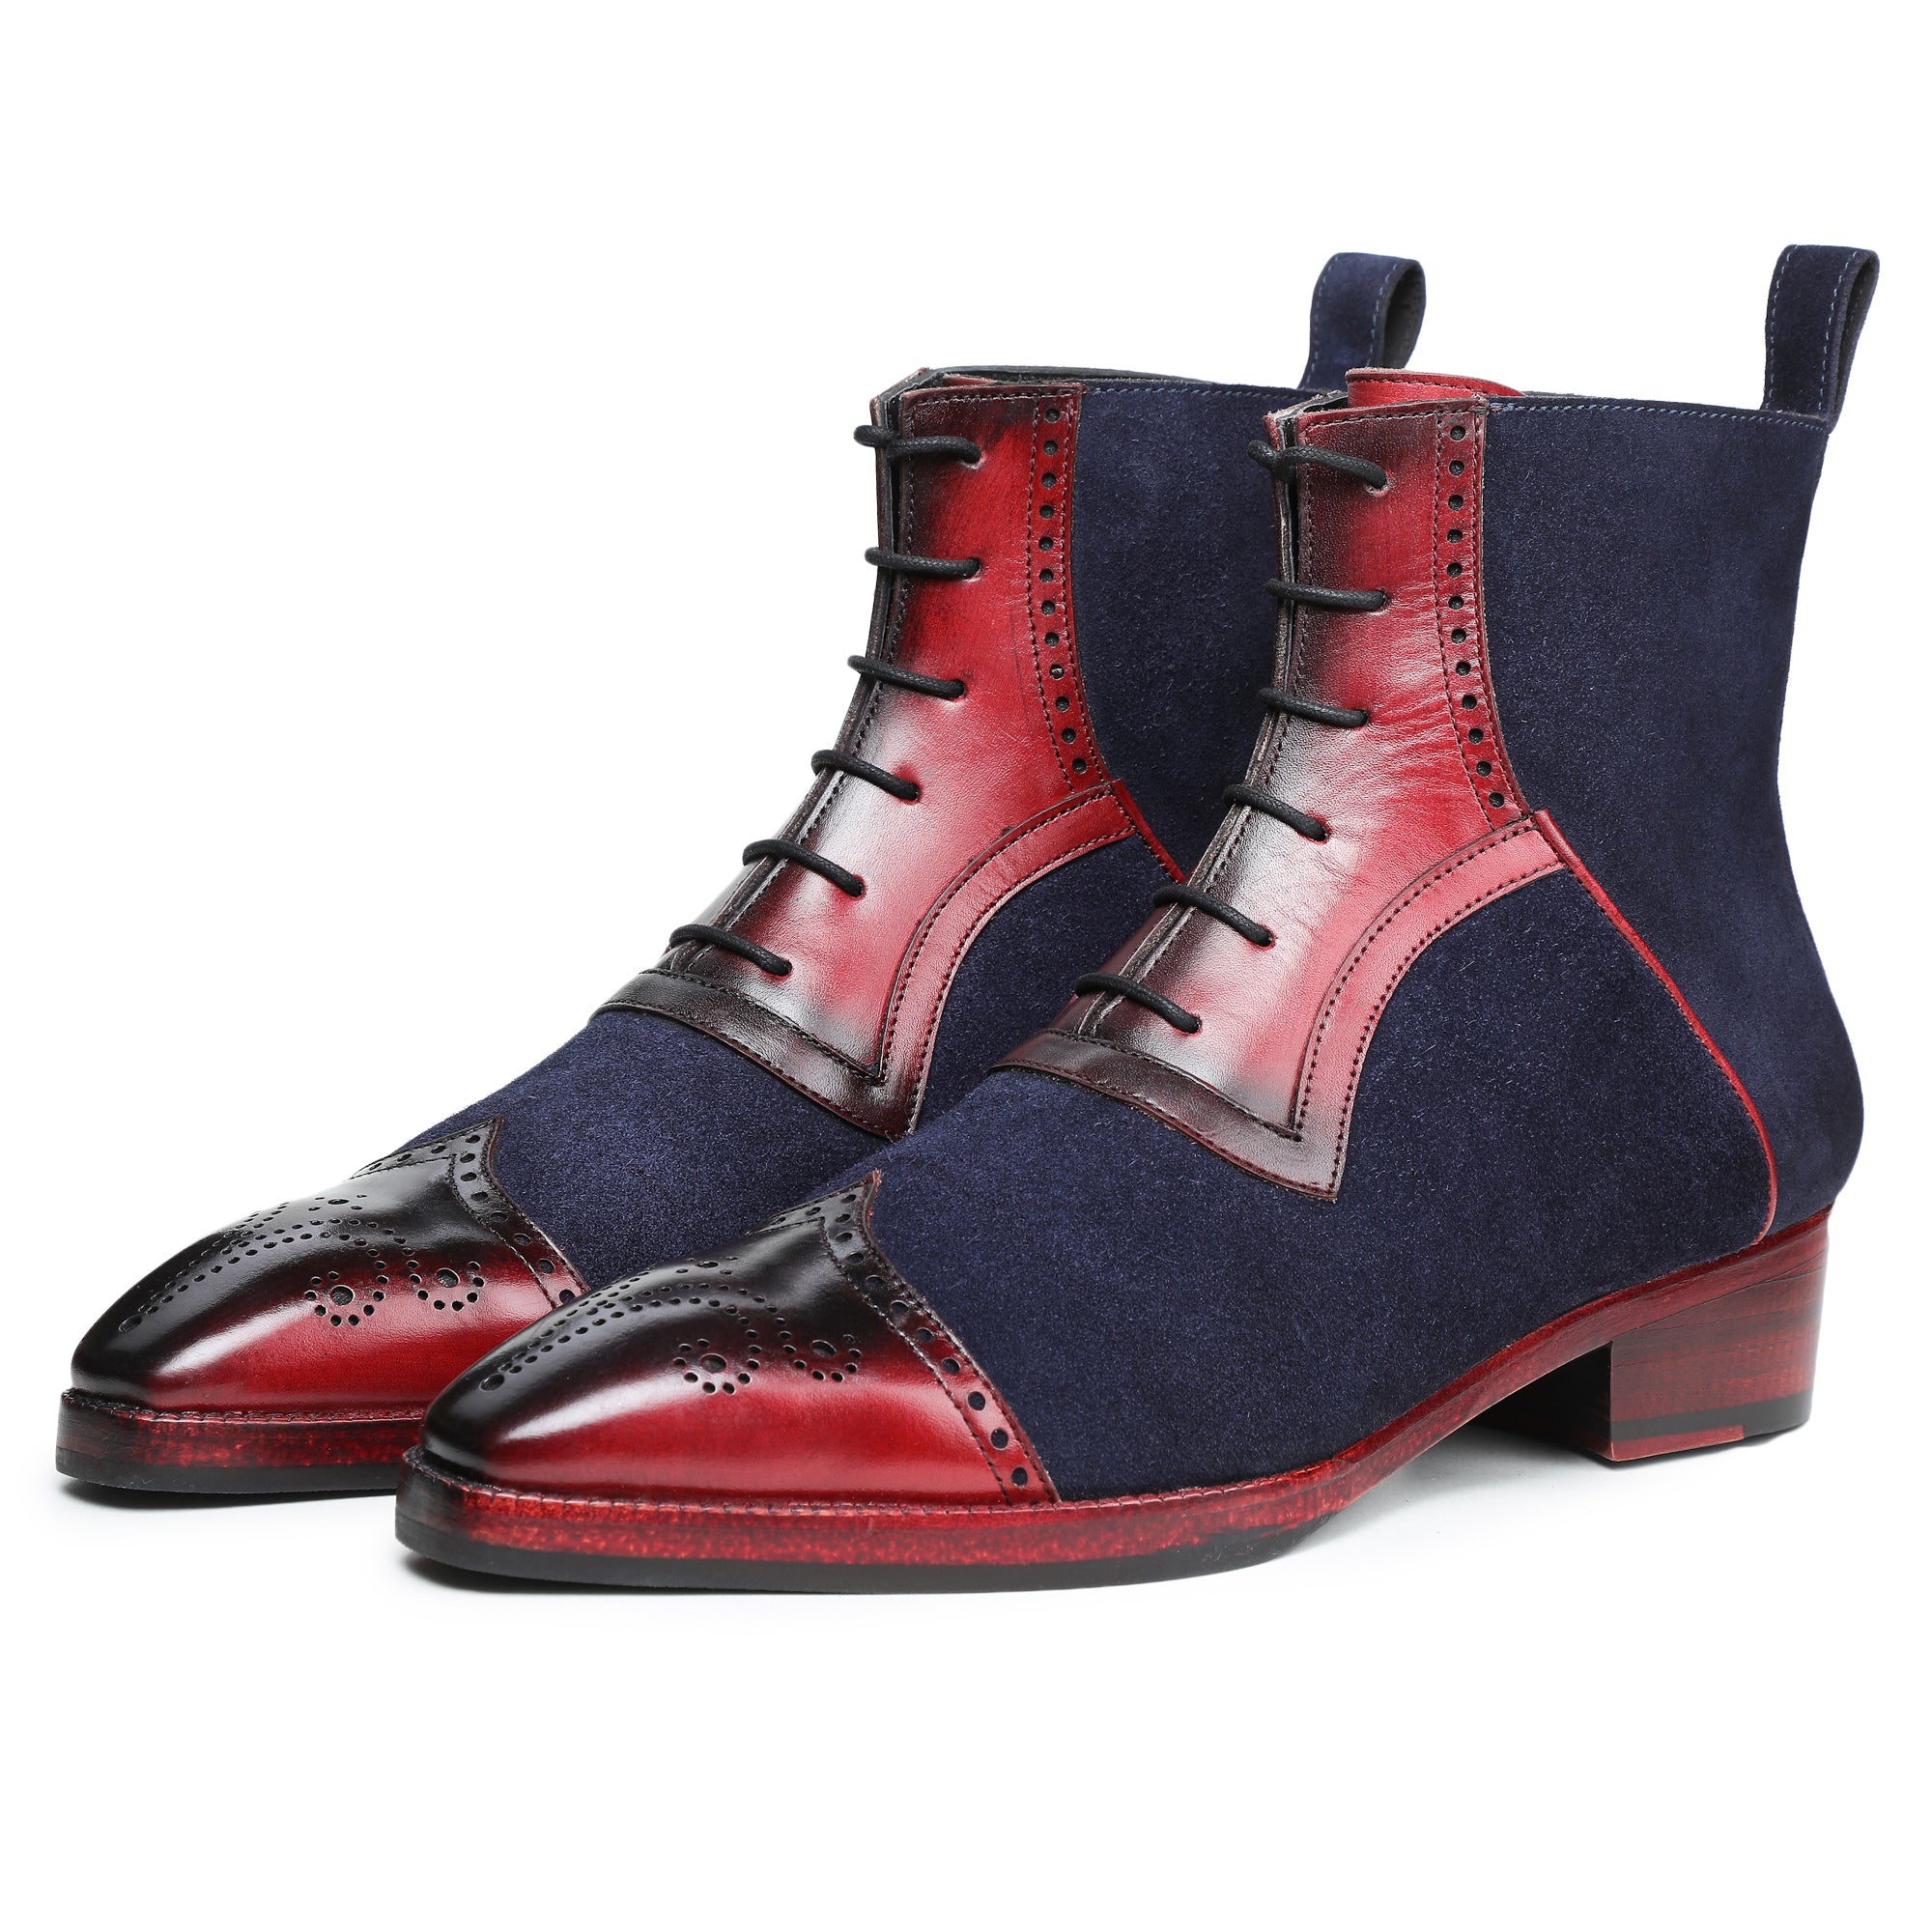 Wingtip Lace Up Ankle Boots - Navy Suede u0026 Burgundy